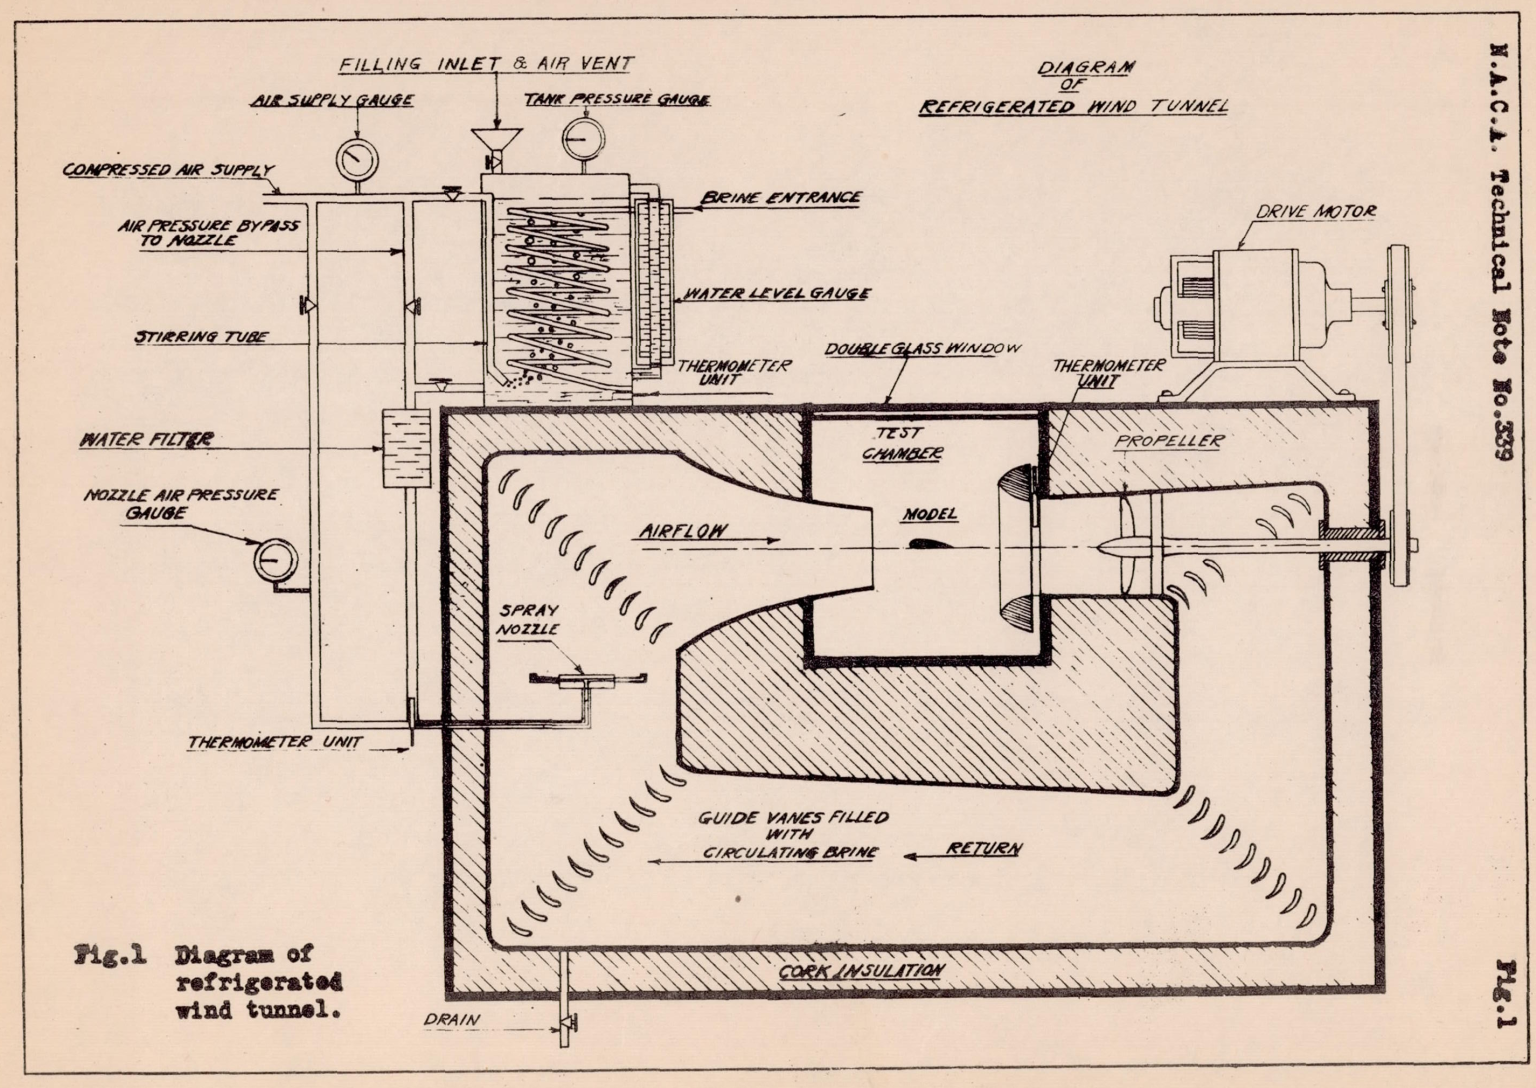 Figure 1. Diagram of refrigerated wind tunnel.